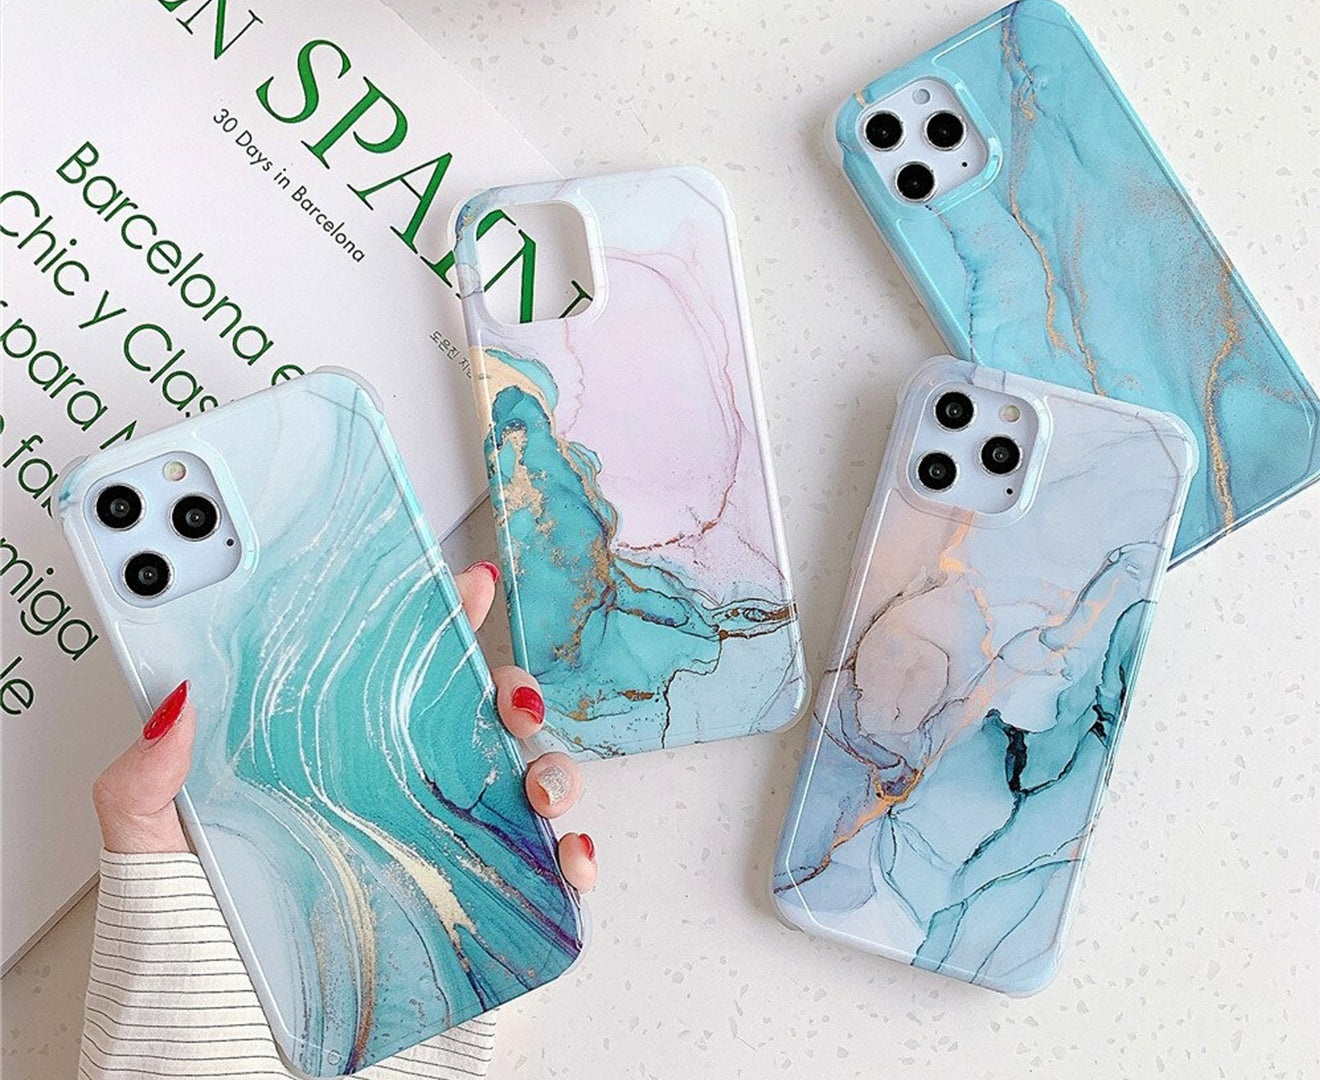 Anymob iPhone Case Light Steel Blue Marble Oil Painting Pattern Soft Silicone Back Cover For iPhone 11 Pro Max 7 8 Plus XS XR SE 2020 12-Mobile Phone Cases-PEROZ Accessories